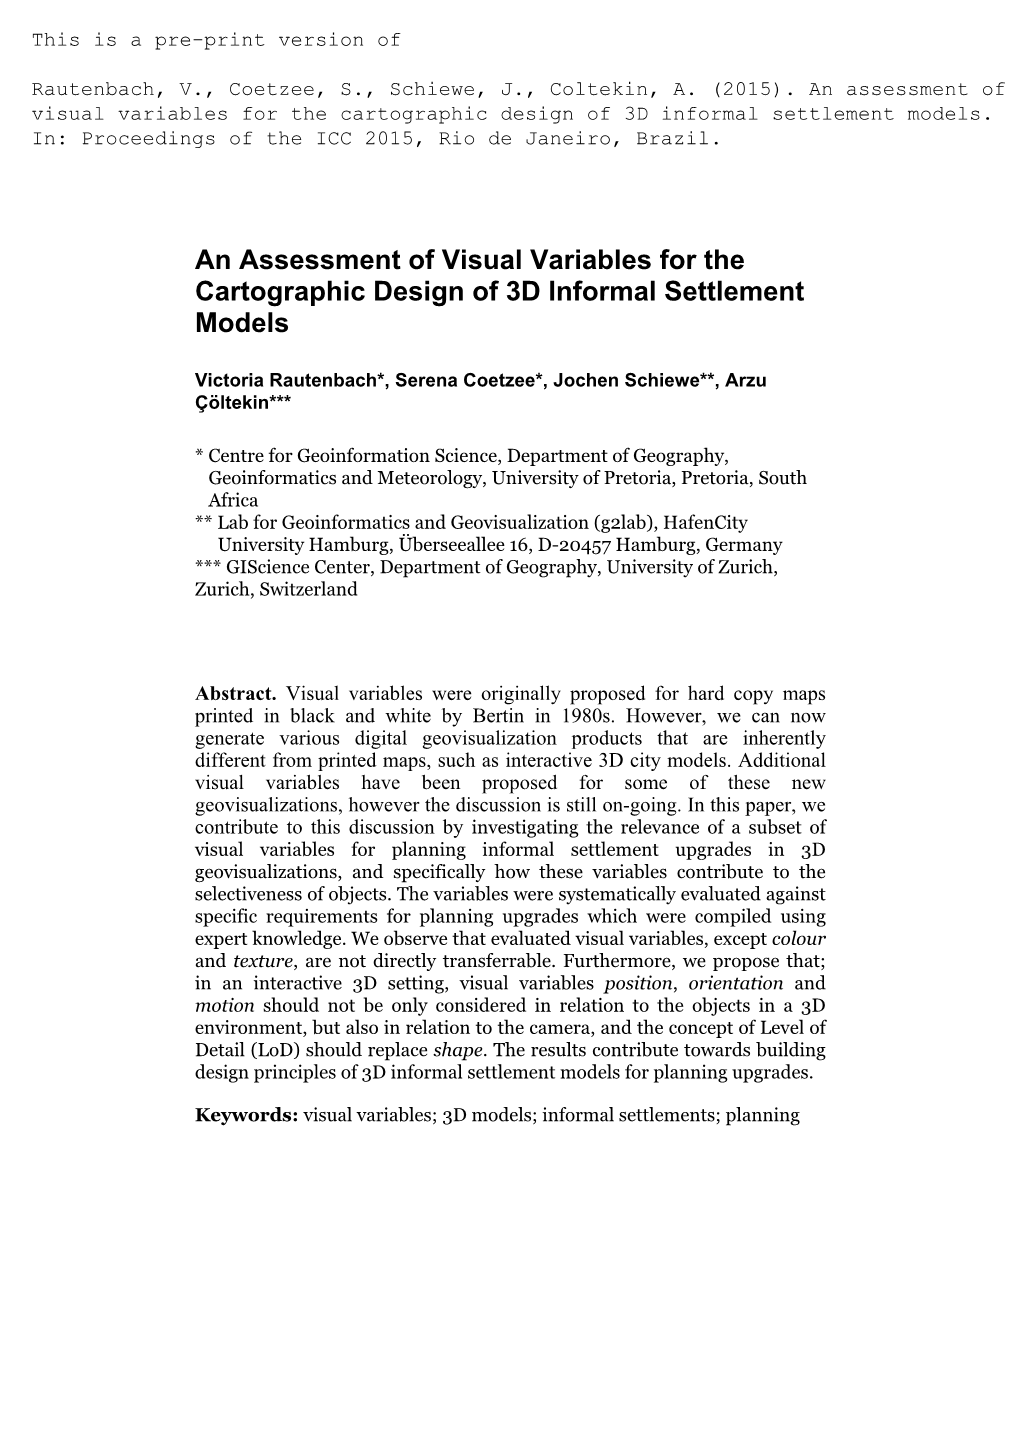 An Assessment of Visual Variables for the Cartographic Design of 3D Informal Settlement Models